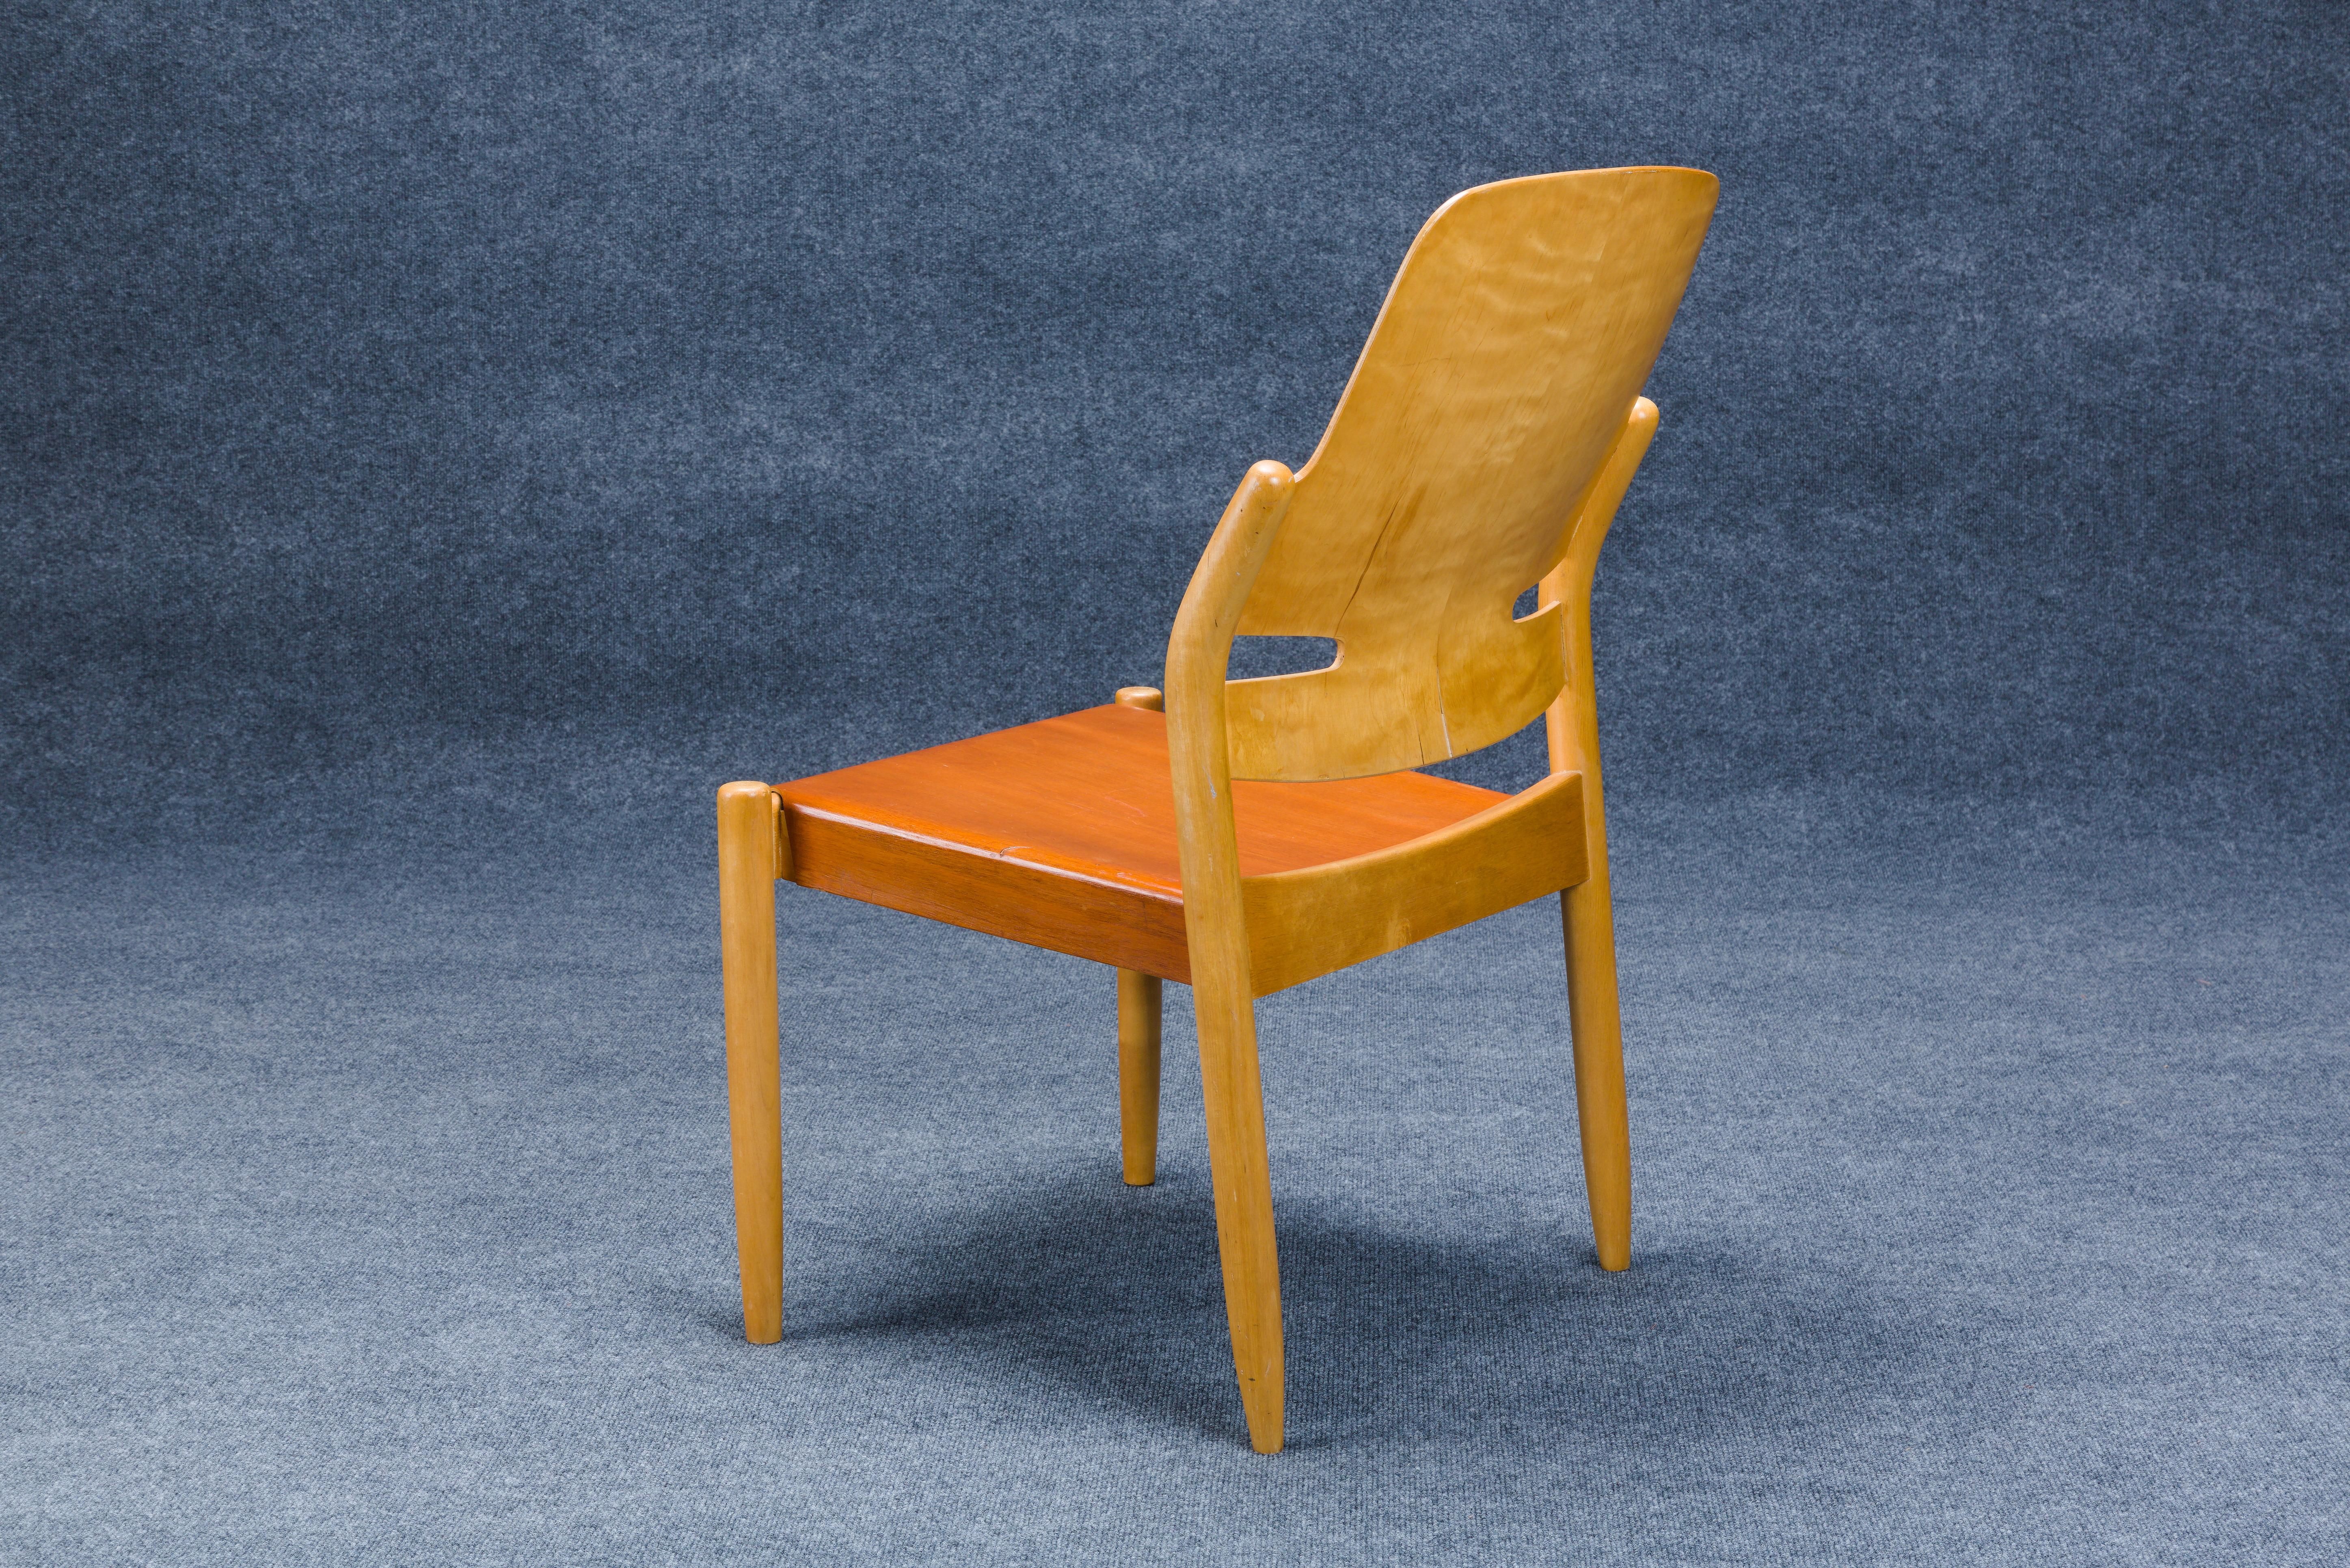 Three Carl-Axel Acking (1910-2001) for Svenska Mobelfarikerna of Bodafors Bentwood Side Chairs, Sweden, c. 1950, designed c.1944, beech, oak, laminated plywood, stackable, with manufacturer's metal label and stamp under seat, Measures: HT. 33 1/4,